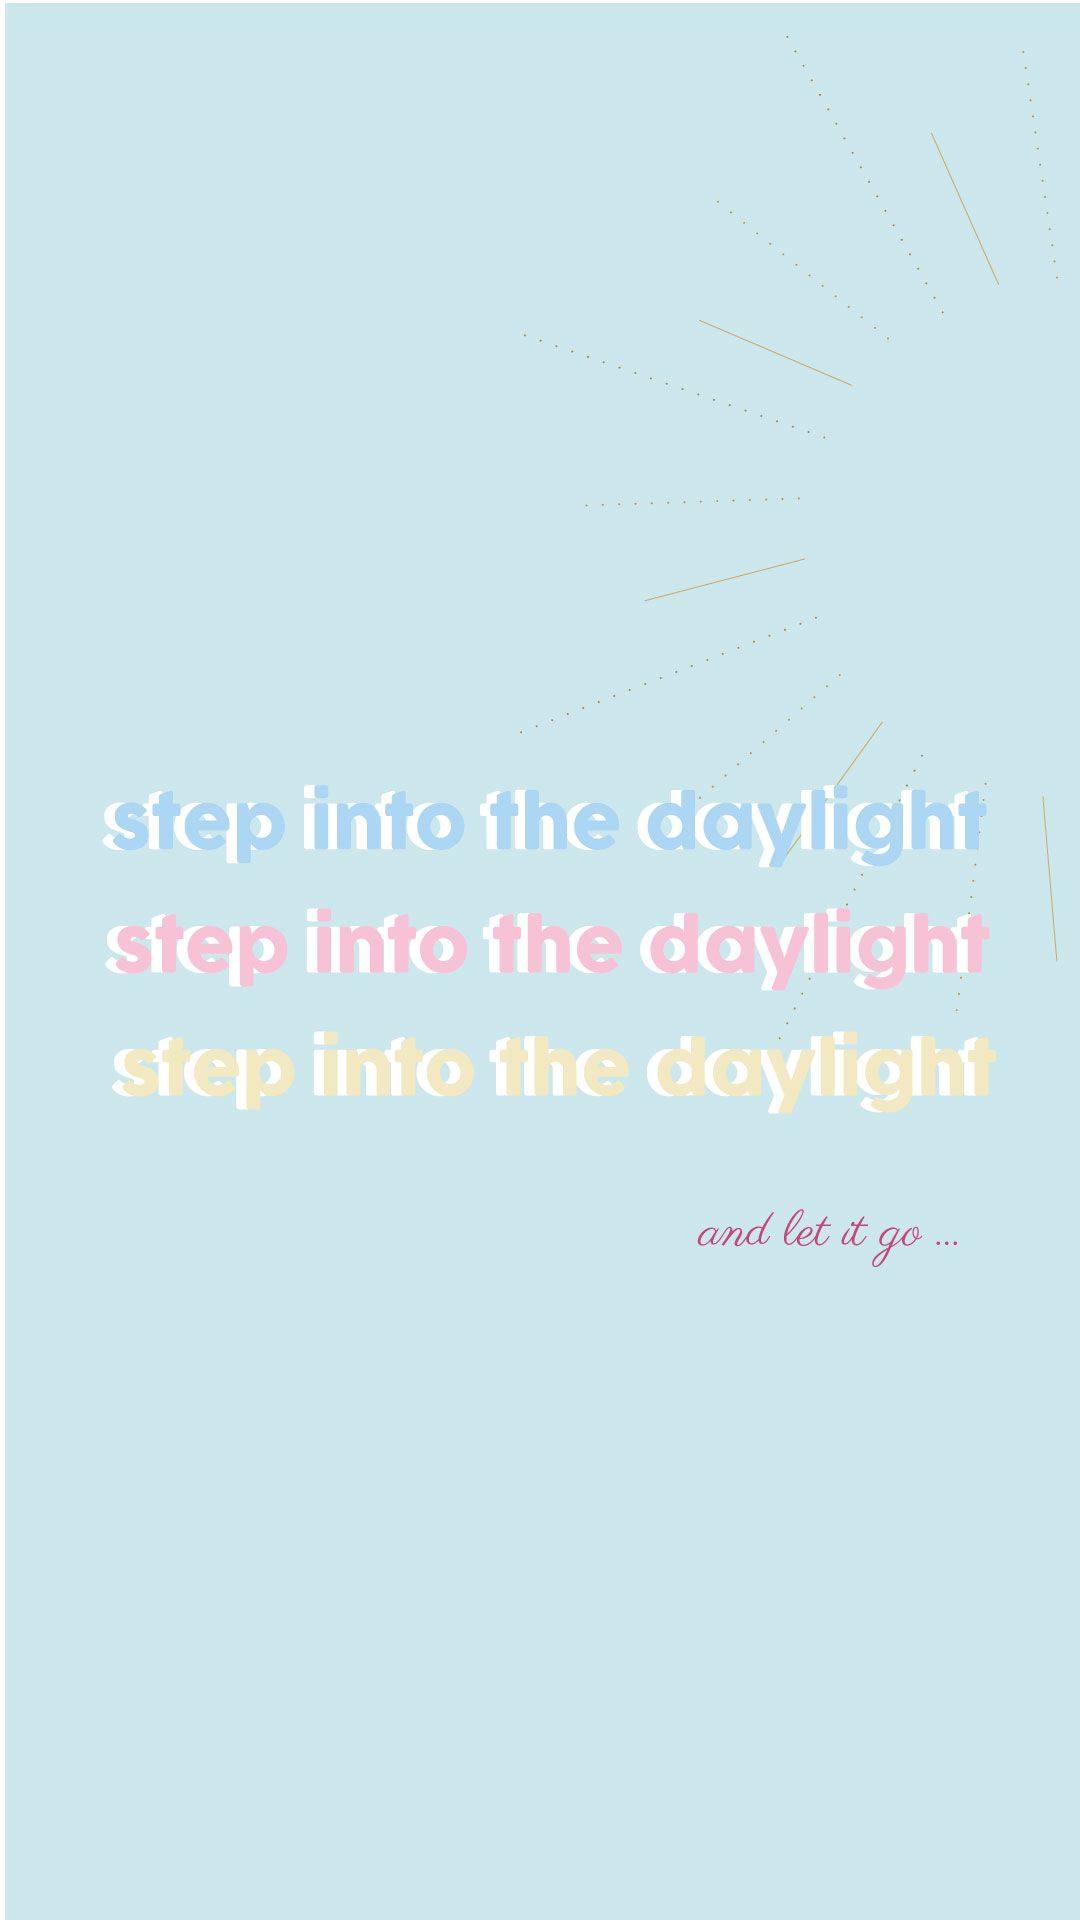 Step into the daylight and let it go. Taylor swift lyrics, Taylor lyrics, Taylor swift songs